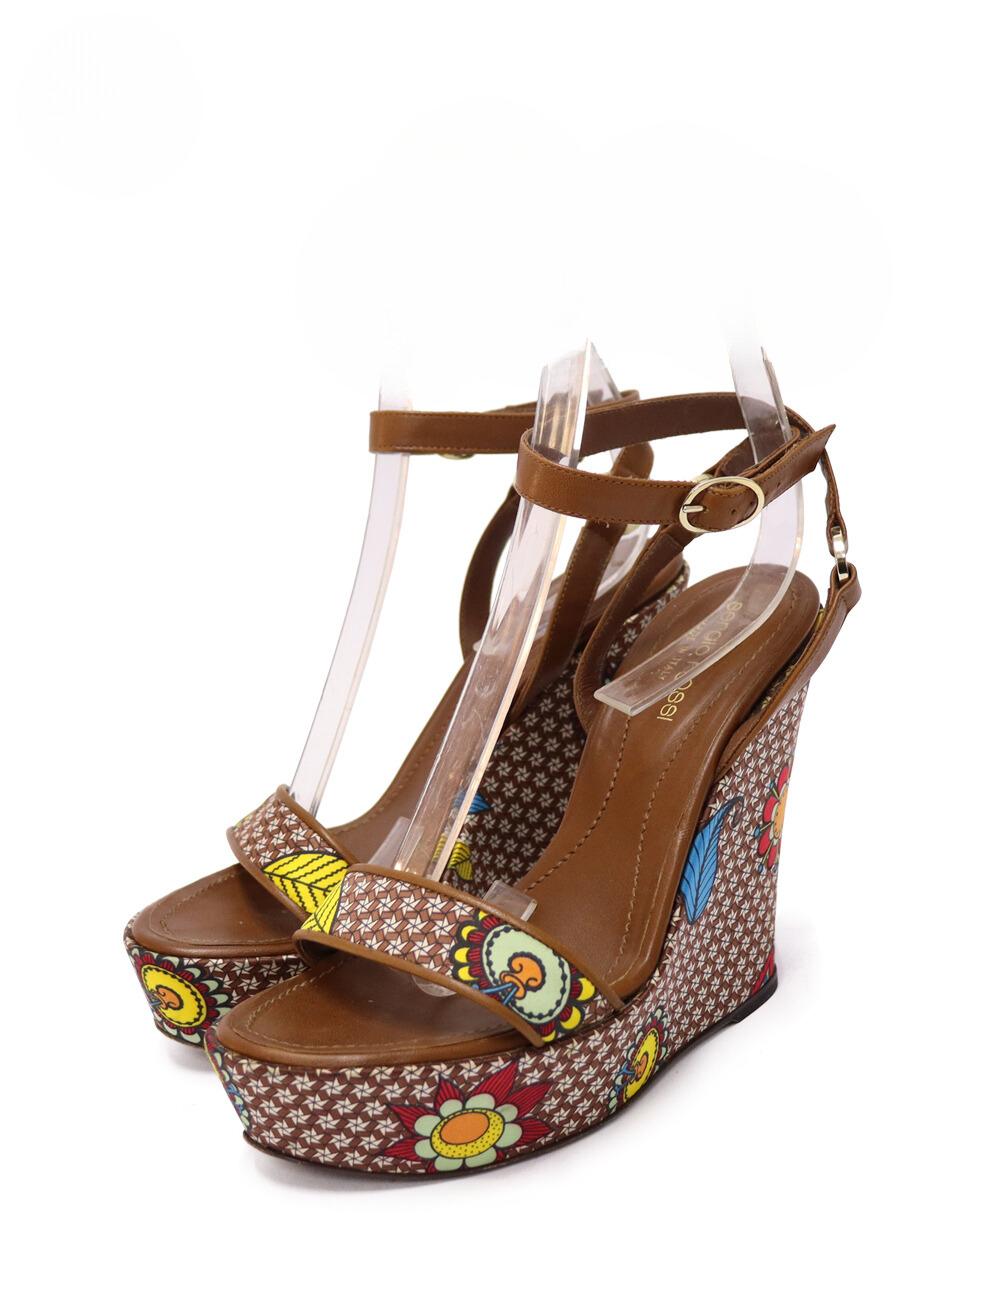 Sergio Rossi Multicolor Printed Leather Ankle-Wrap Wedge Platform Sandals.

Material: Leather and Satin
Heel Height: 11cm
Platform Height: 2cm
Size: EU 37
Overall Condition: Excellent.
Interior Condition: Signs of use.
Exterior Condition: Barely